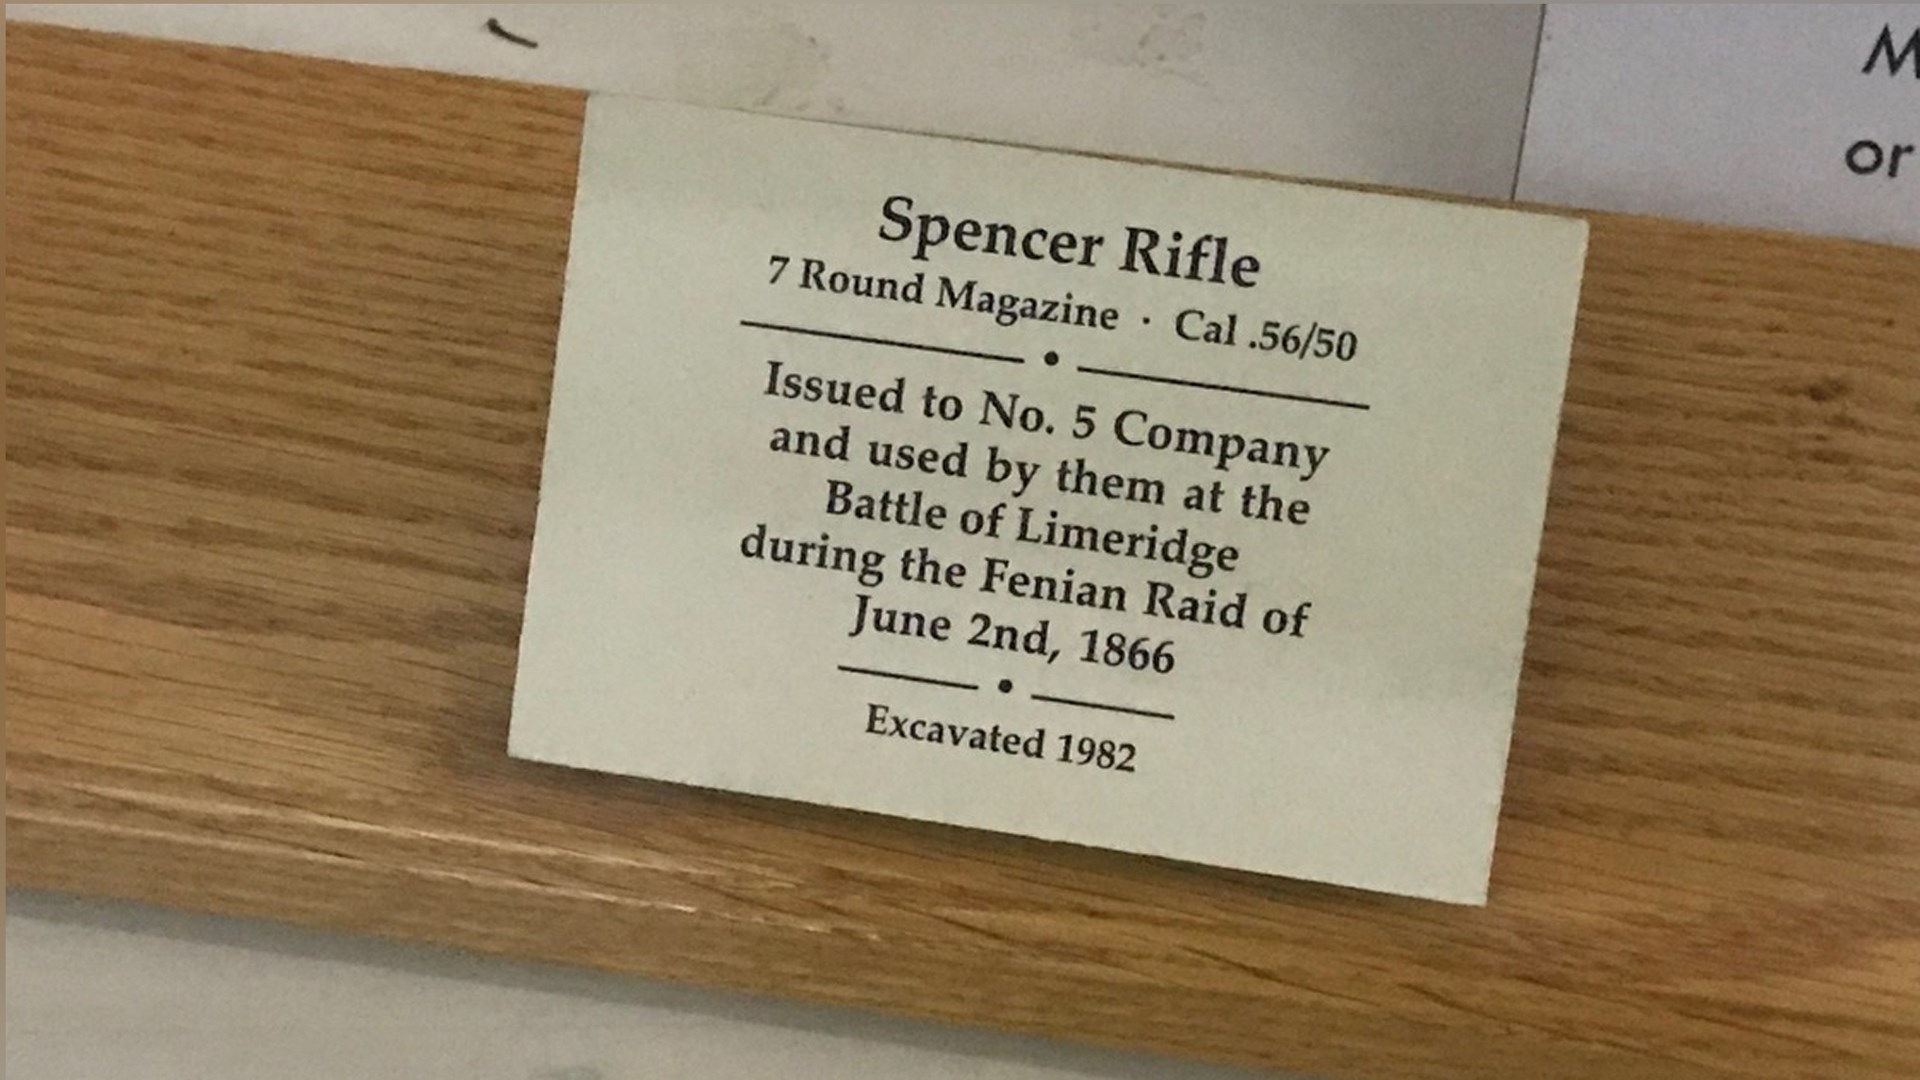 This was the first clue that the Frankenspencer may actually have seen service at the Battle of Ridgeway. Image courtesy of Owen Conner.